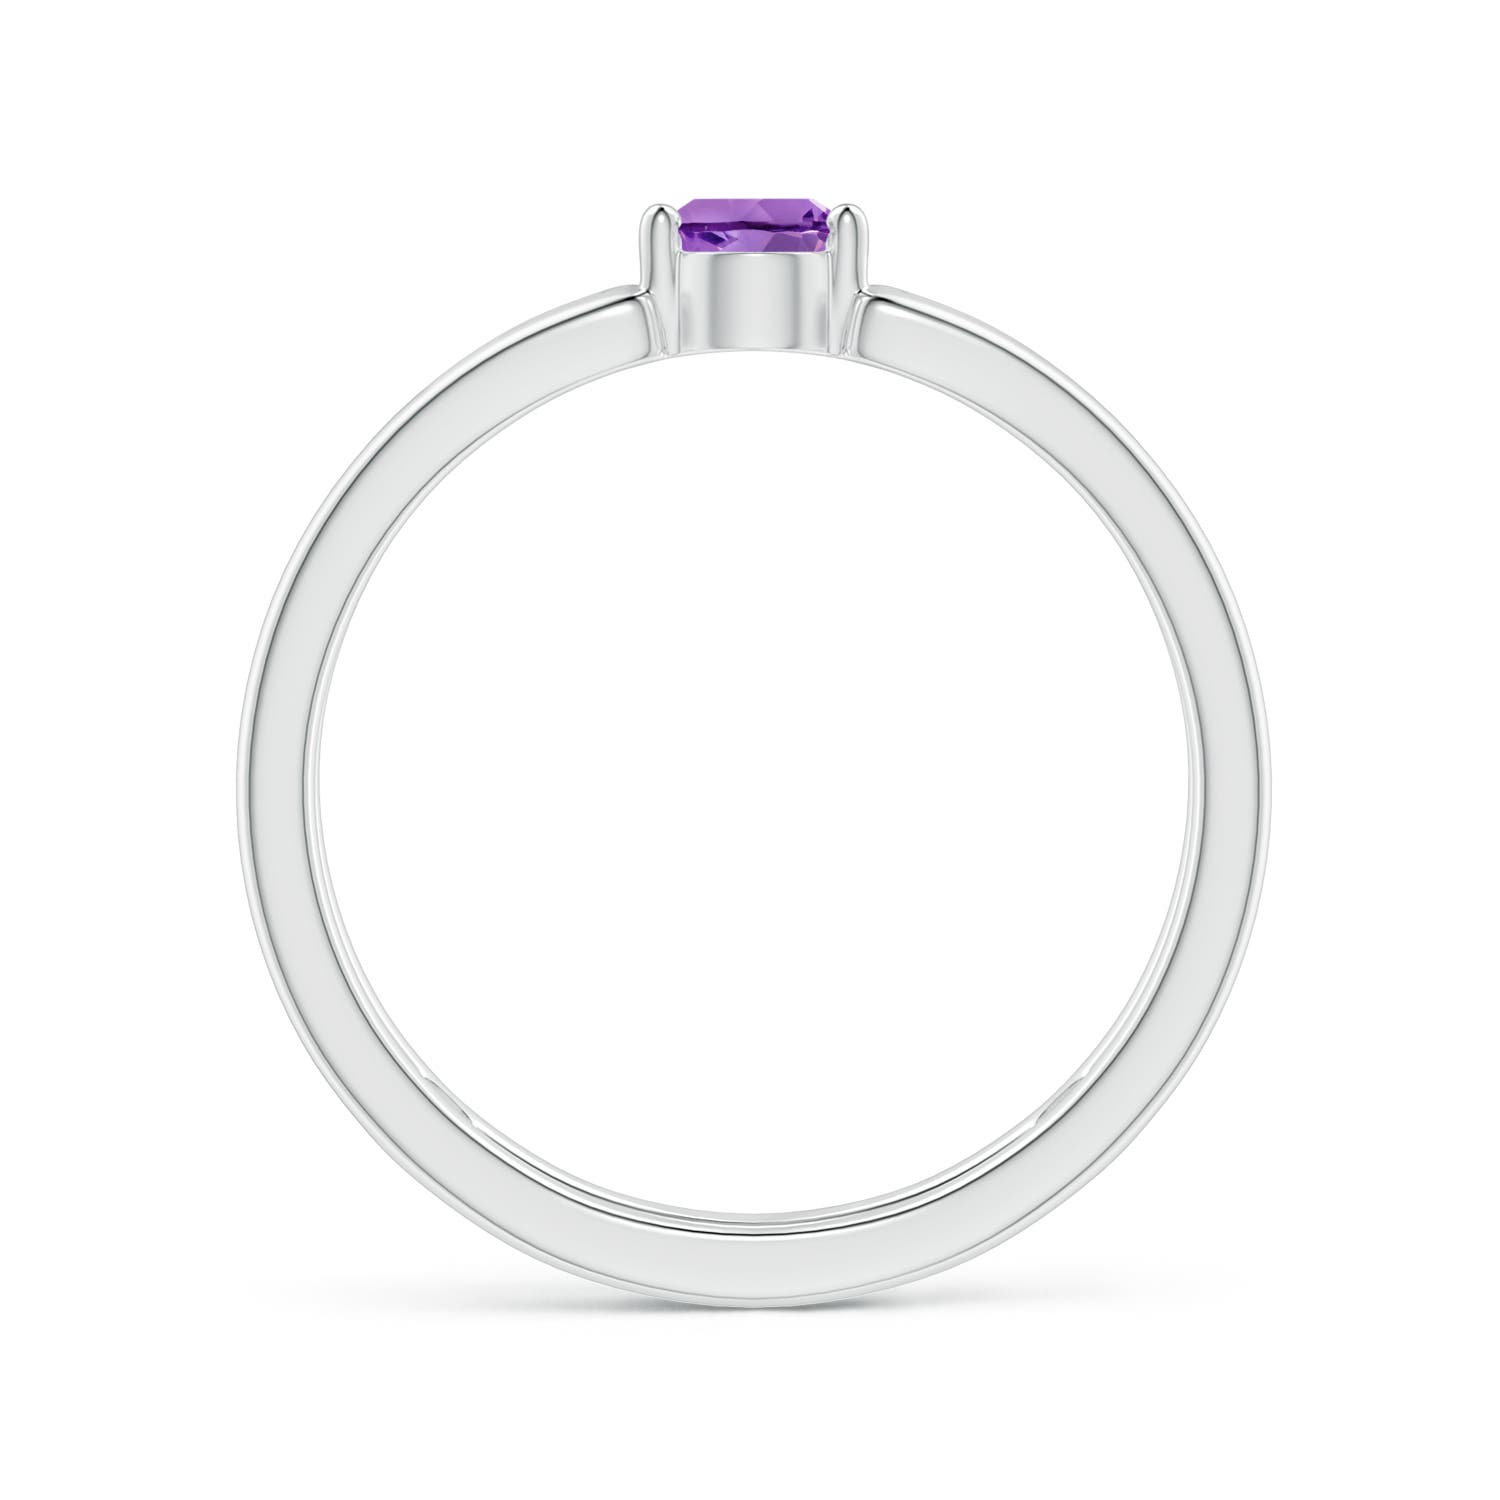 AA - Amethyst / 0.33 CT / 14 KT White Gold